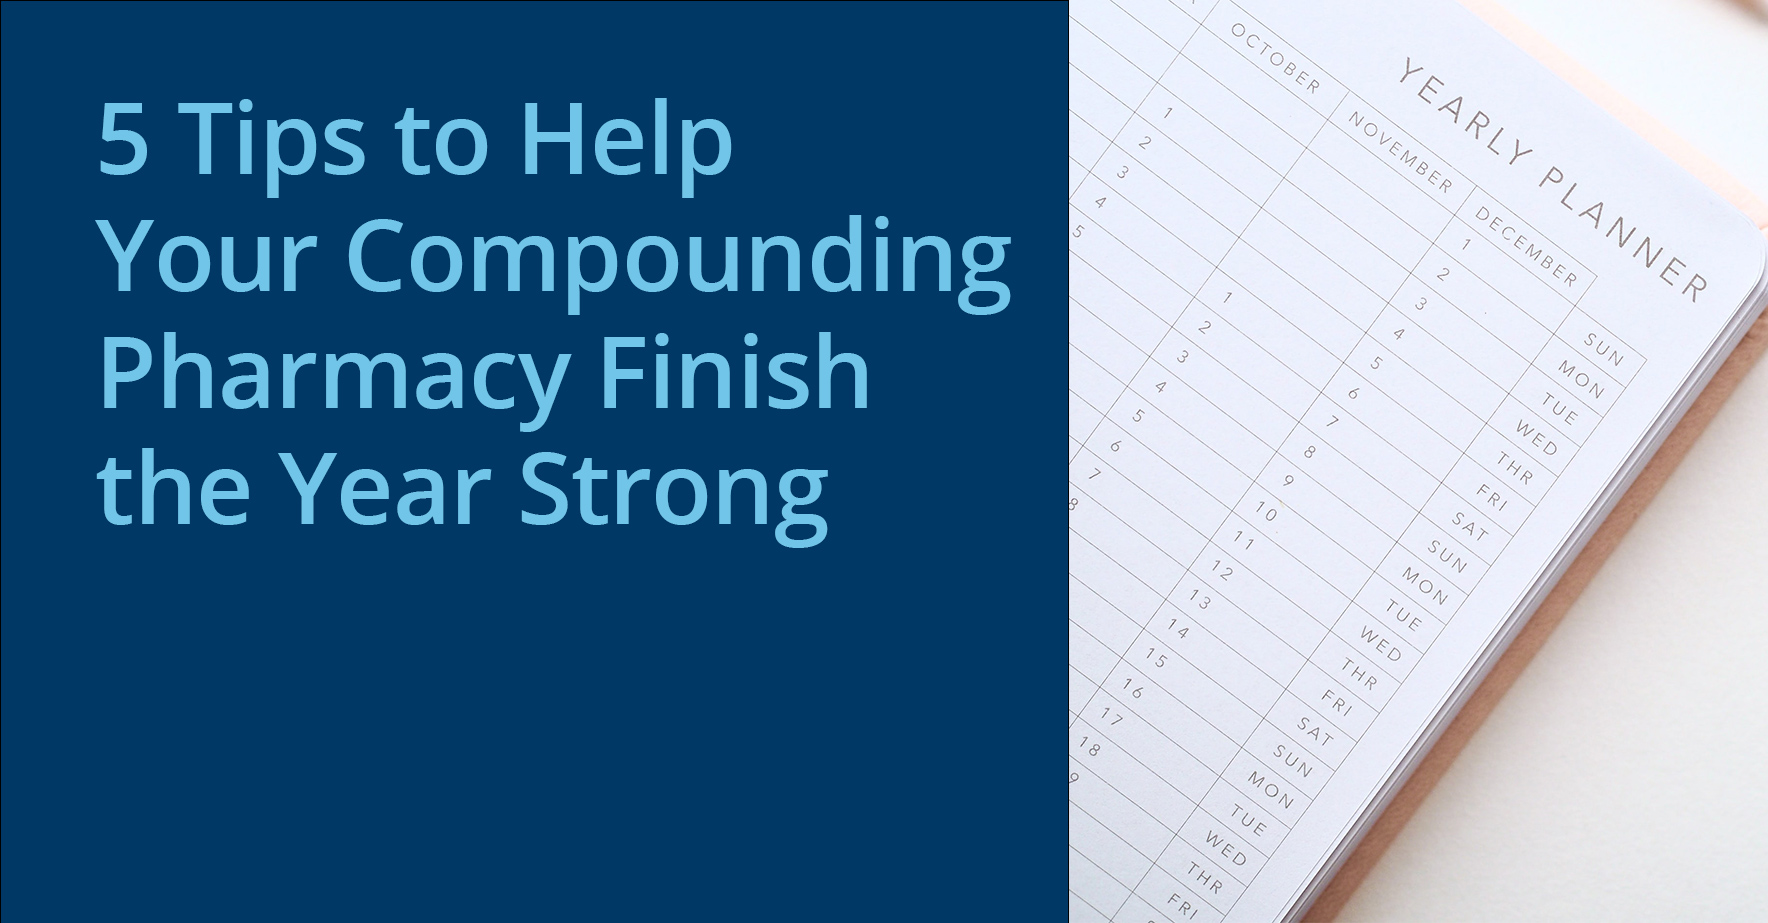 5_tips_to_help_your_compounding_pharmacy_finish_the_year_strong.jpg.jpg.